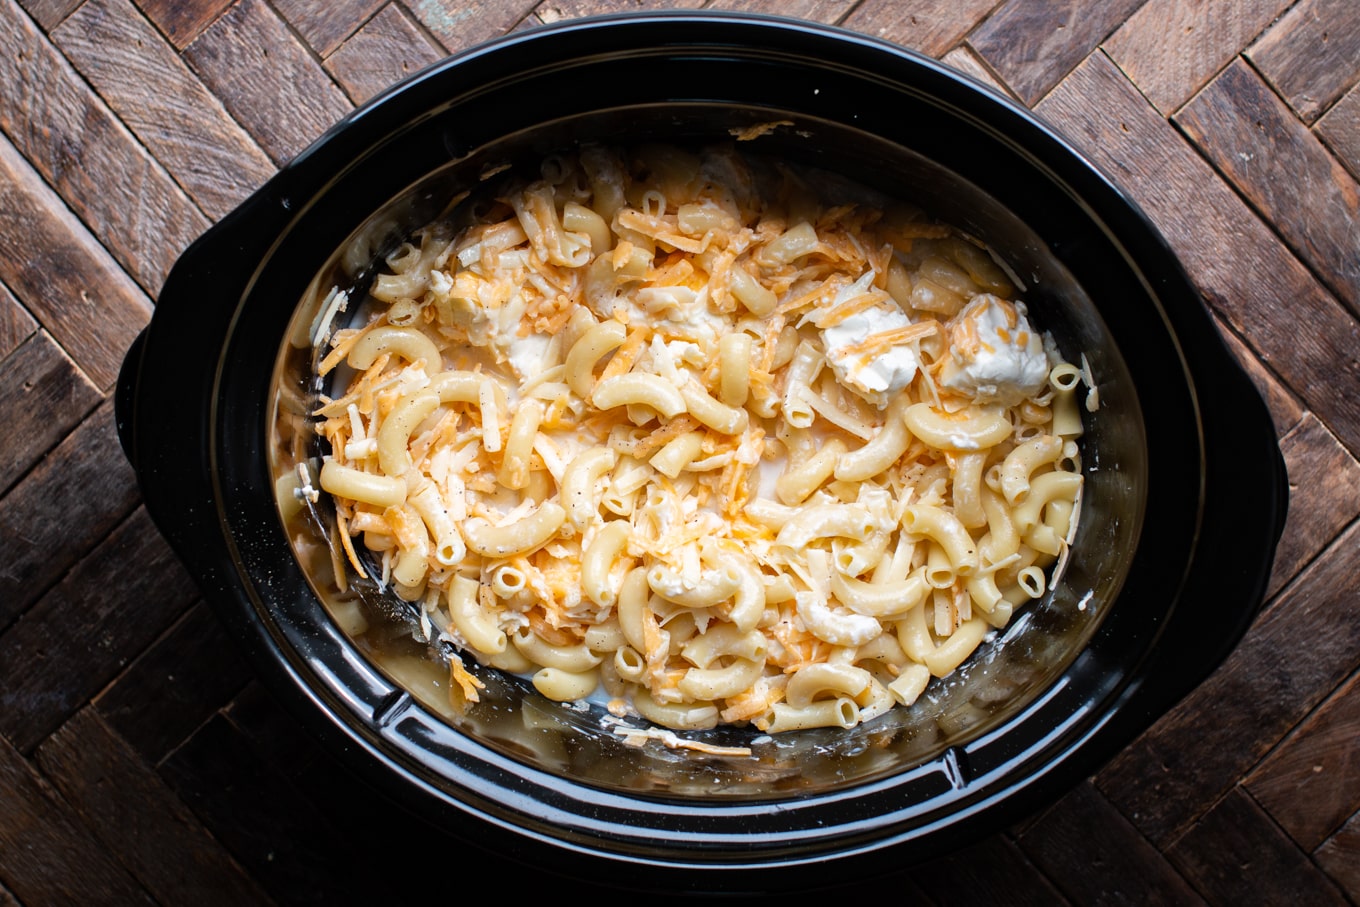 Cooked macaroni noodles, cream cheese and cheddar cheese before cooked in a slow cooker.